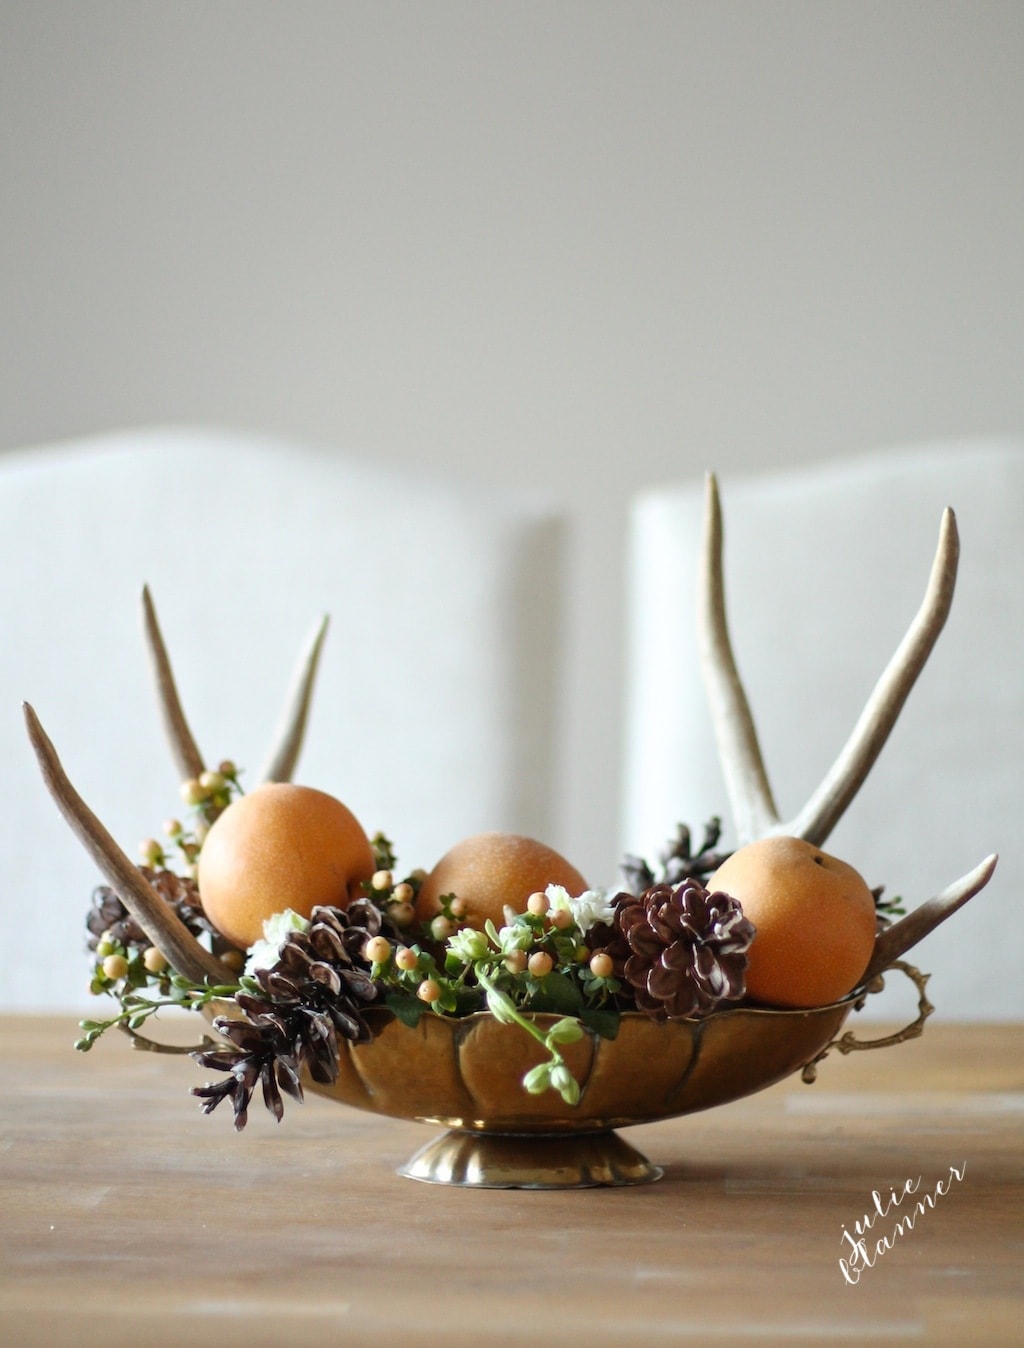 DIY woodland inspired centerpiece with antlers, pinecones and apples